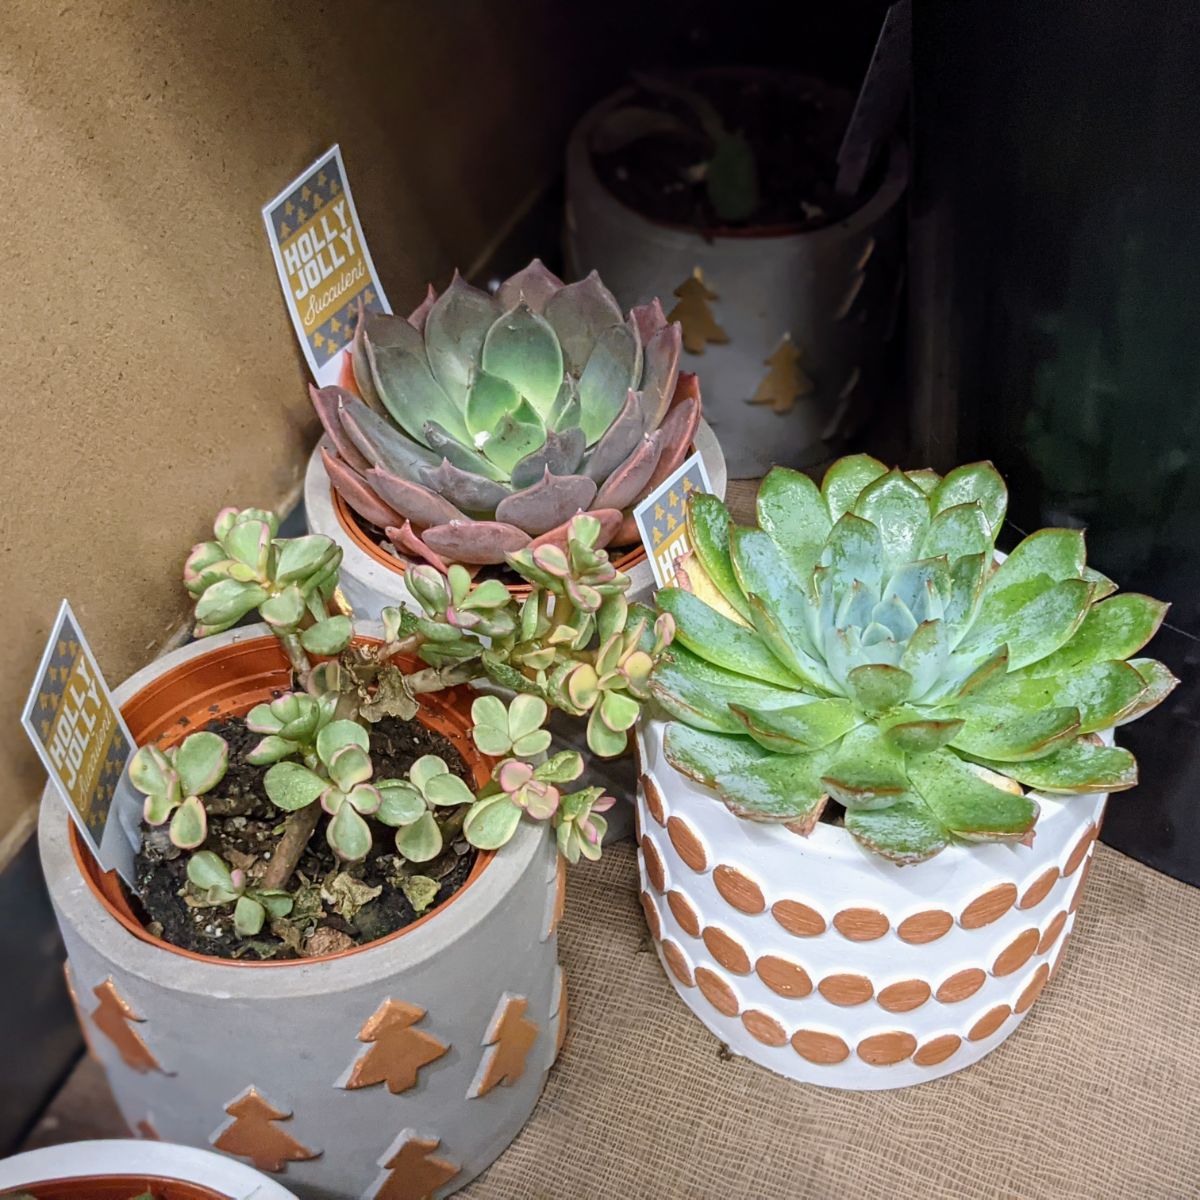 Festive holiday succulent planters for sale at Aldi in December 2021